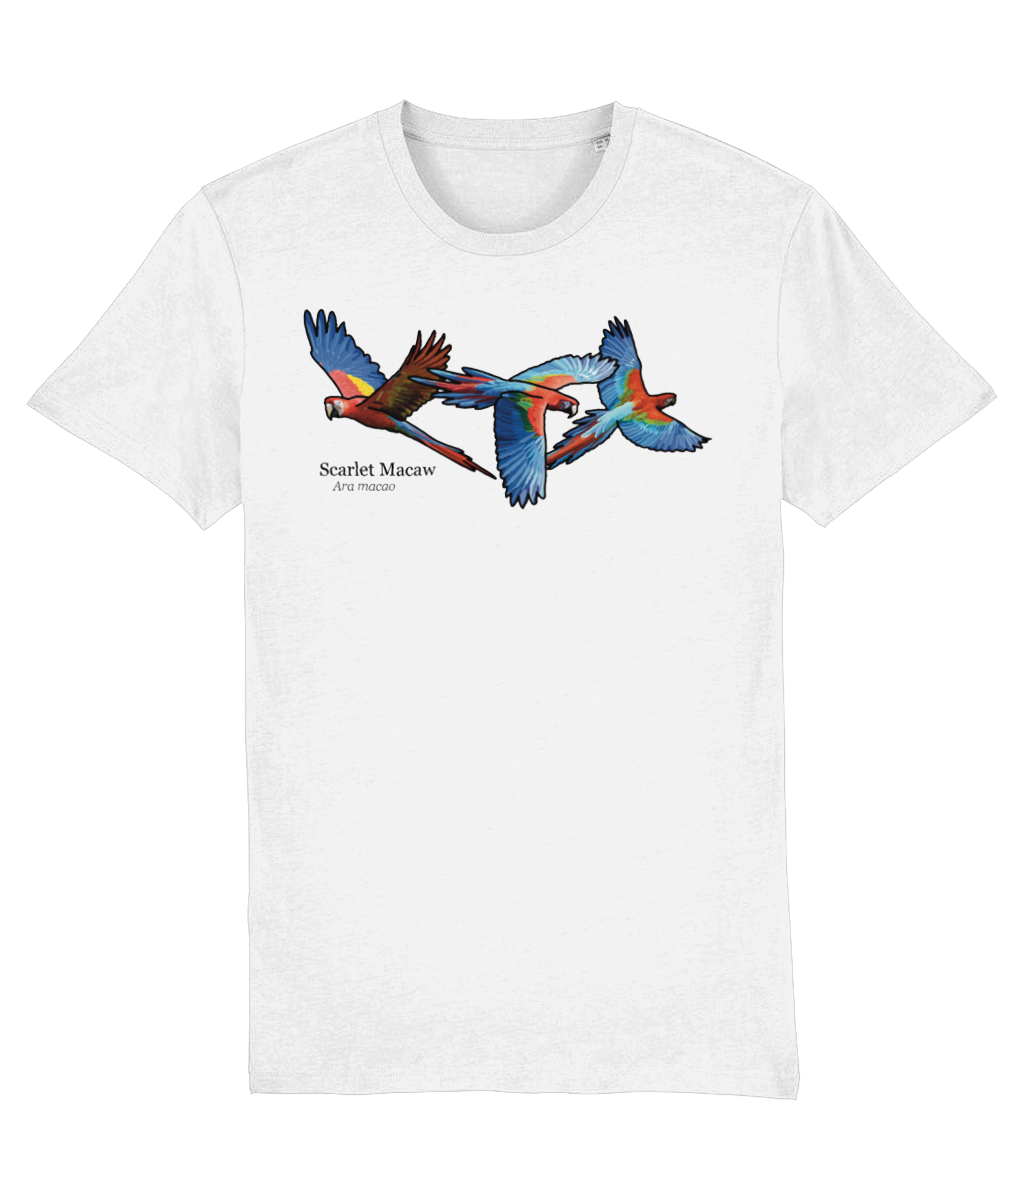 Scarlet Macaw Charity T-Shirt